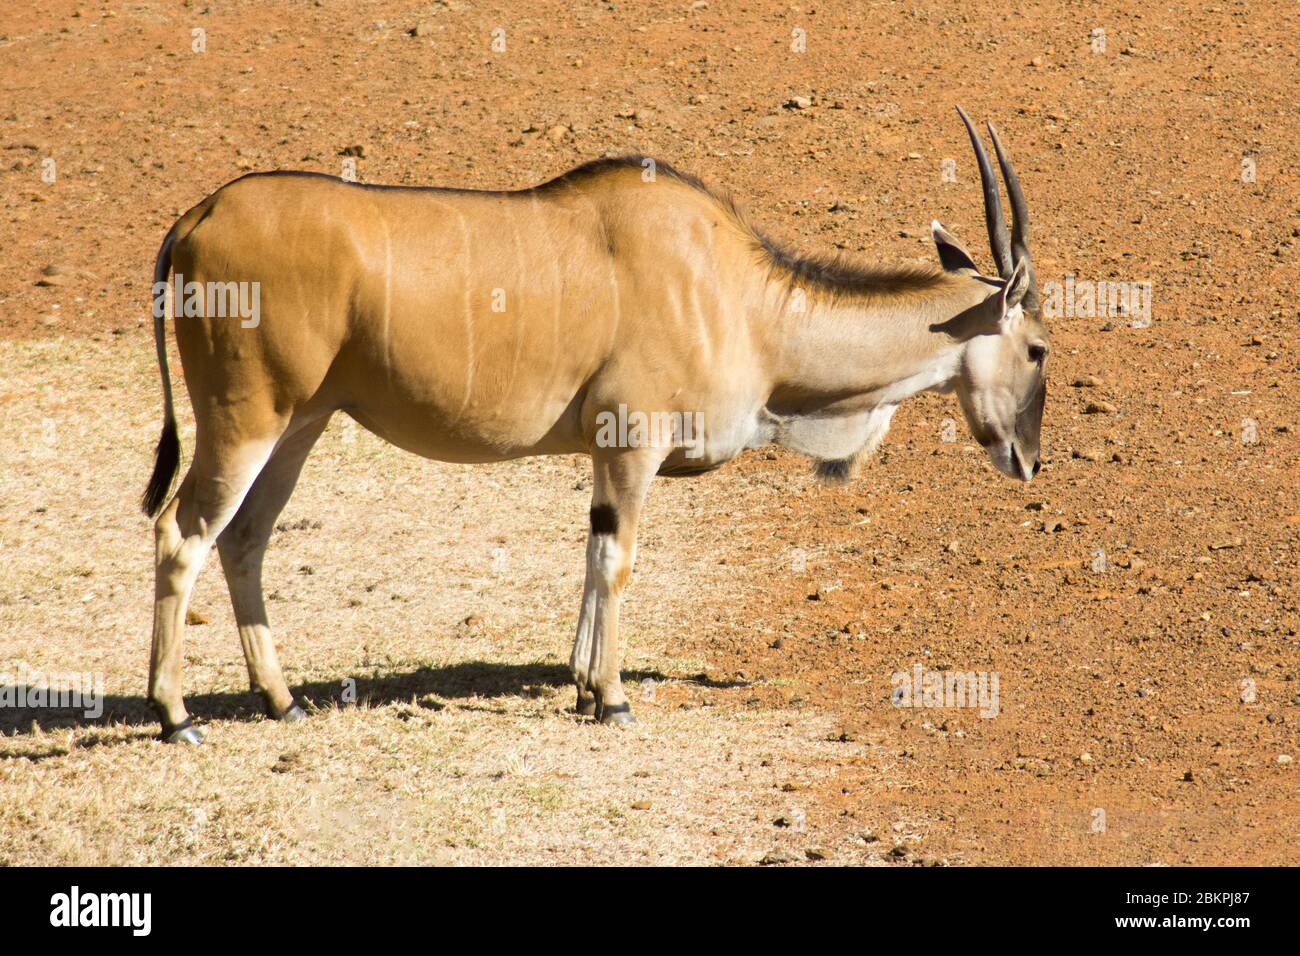 A wild Common Eland (or Antelope) in a South African game reserve or safari park Stock Photo